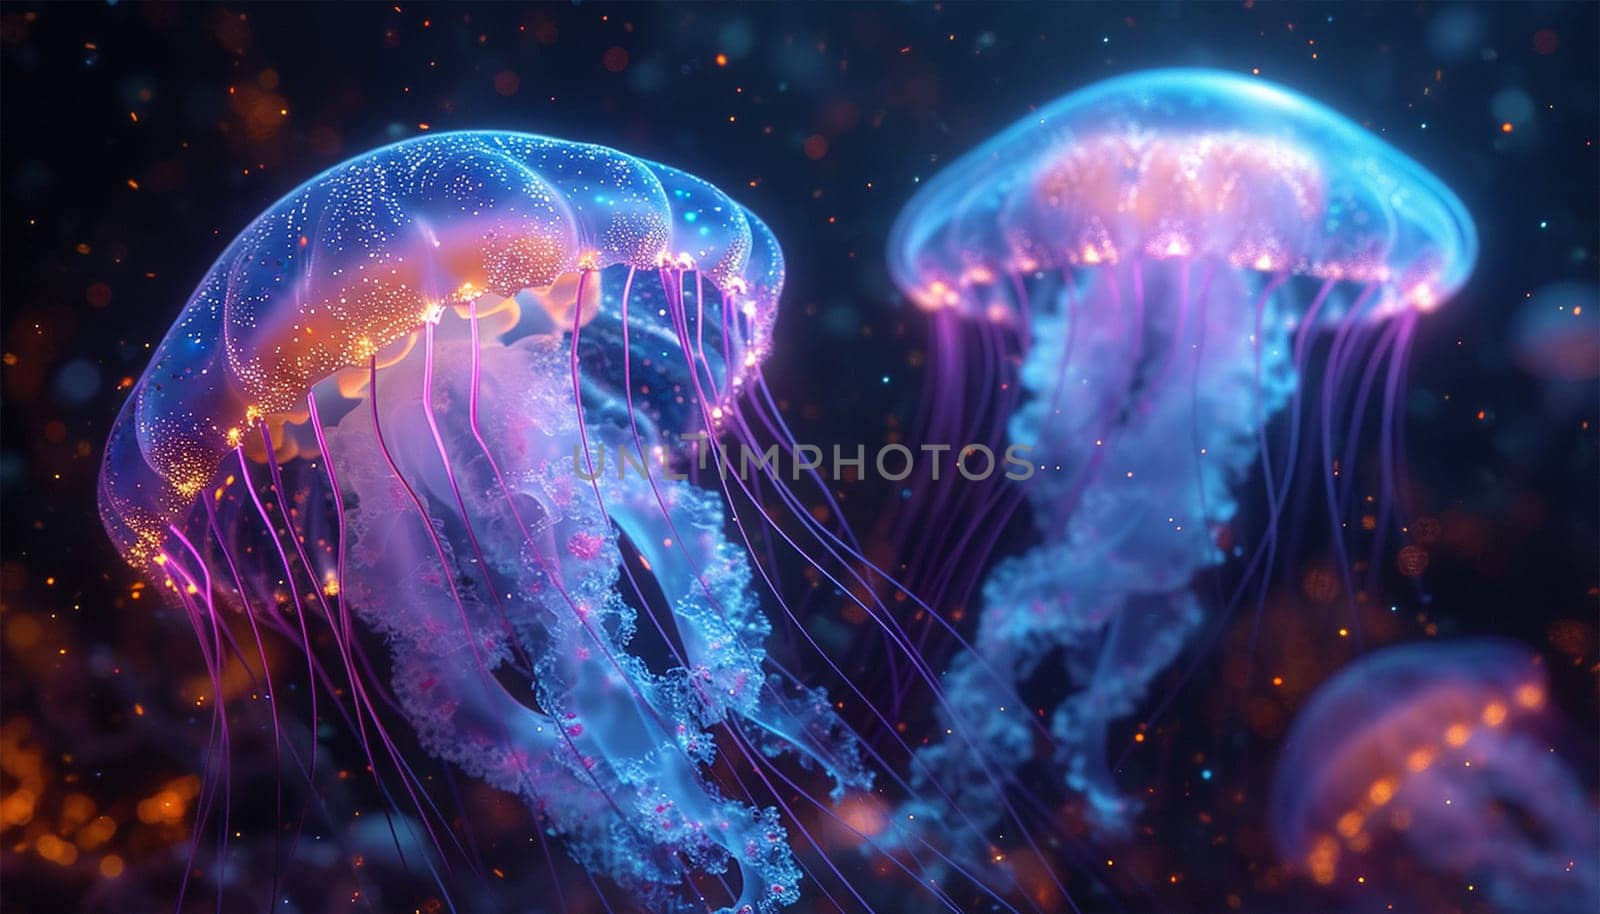 Jellyfish floating in magical ocean. Beautiful cosmic neon purple sea. collection of animals. 3d animation of a seamless loop. Underwater world glowing fish in the water. Marine life. Pink,blue and purple by Annebel146